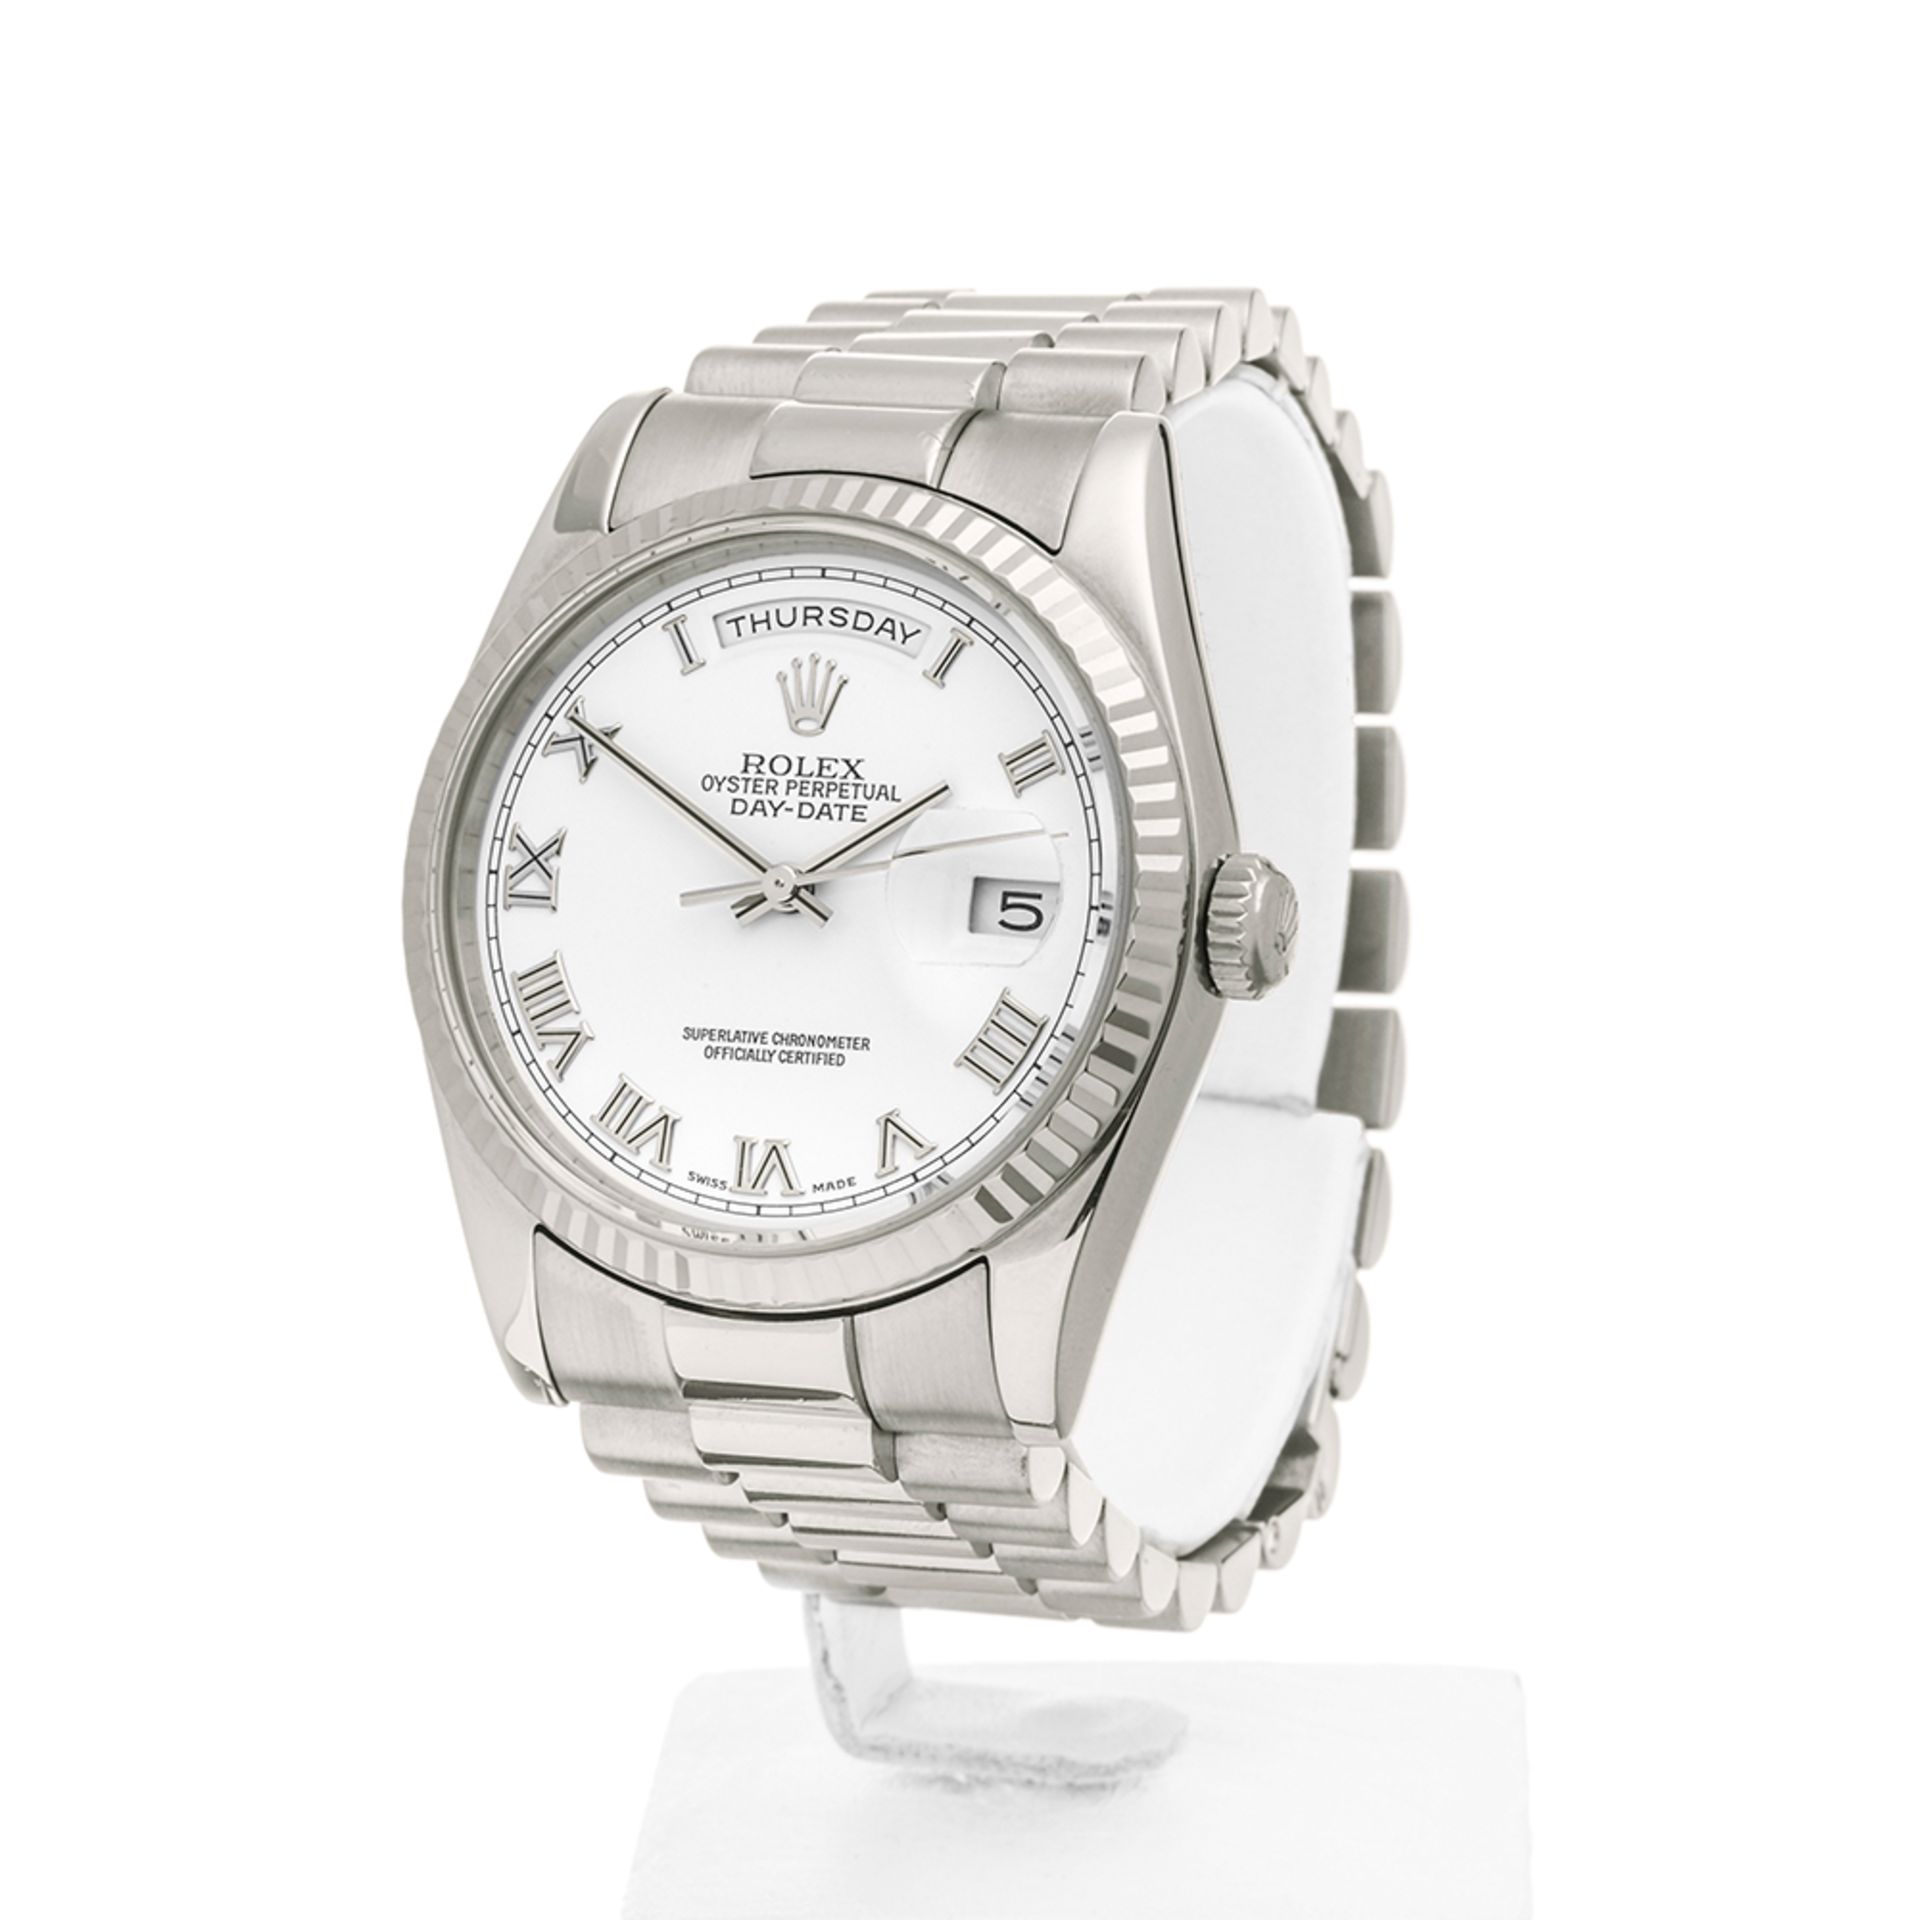 Rolex Day-Date 36mm 18k White Gold - 118239